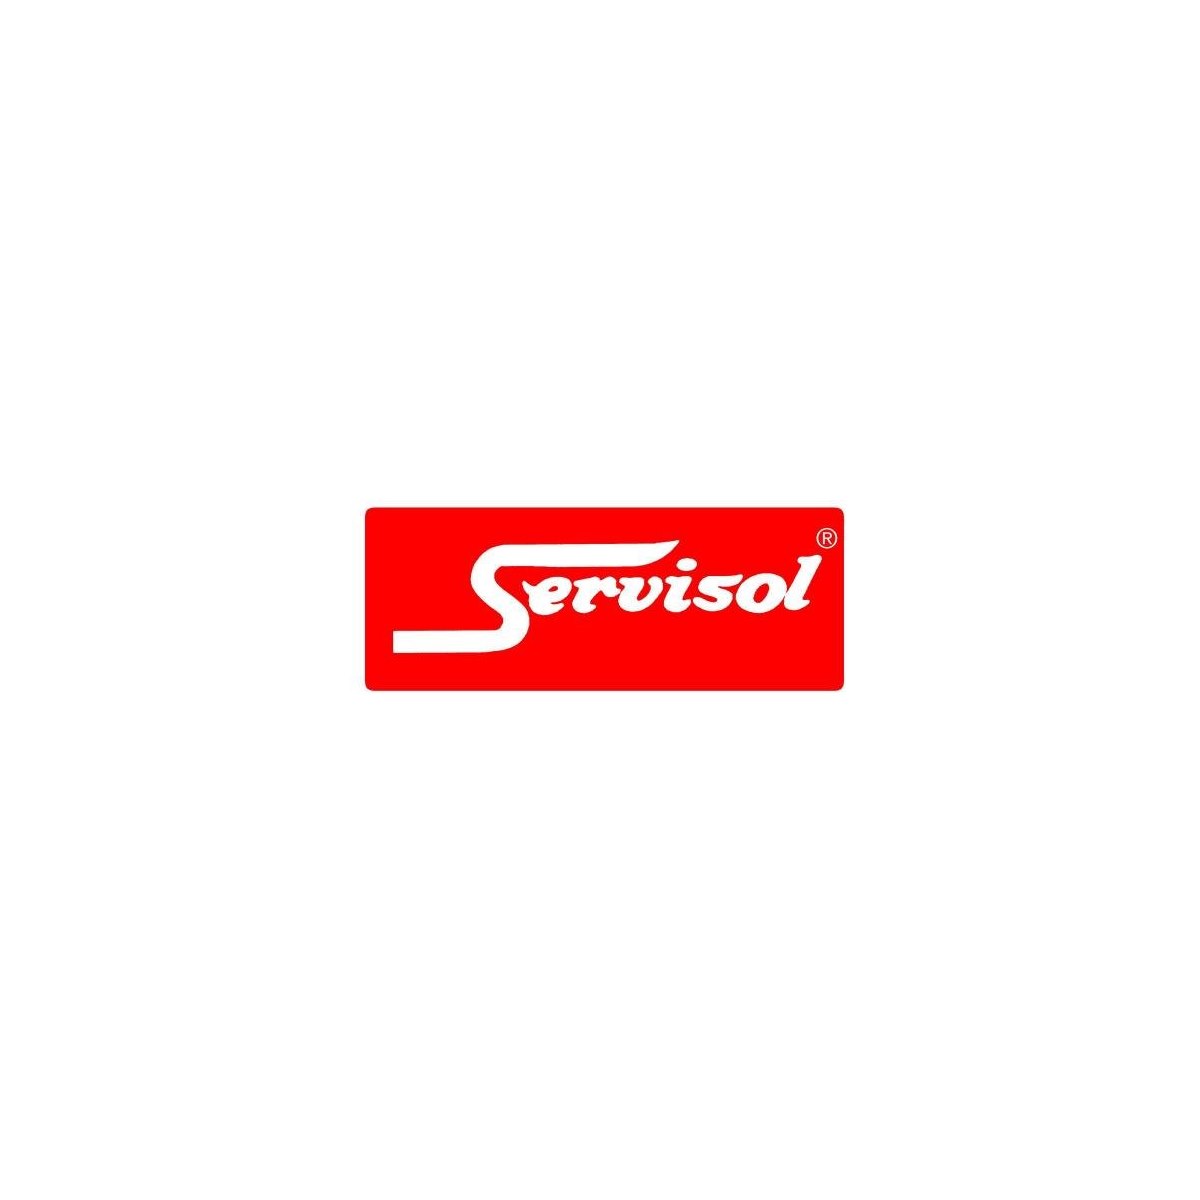 Where to Buy Servisol Products